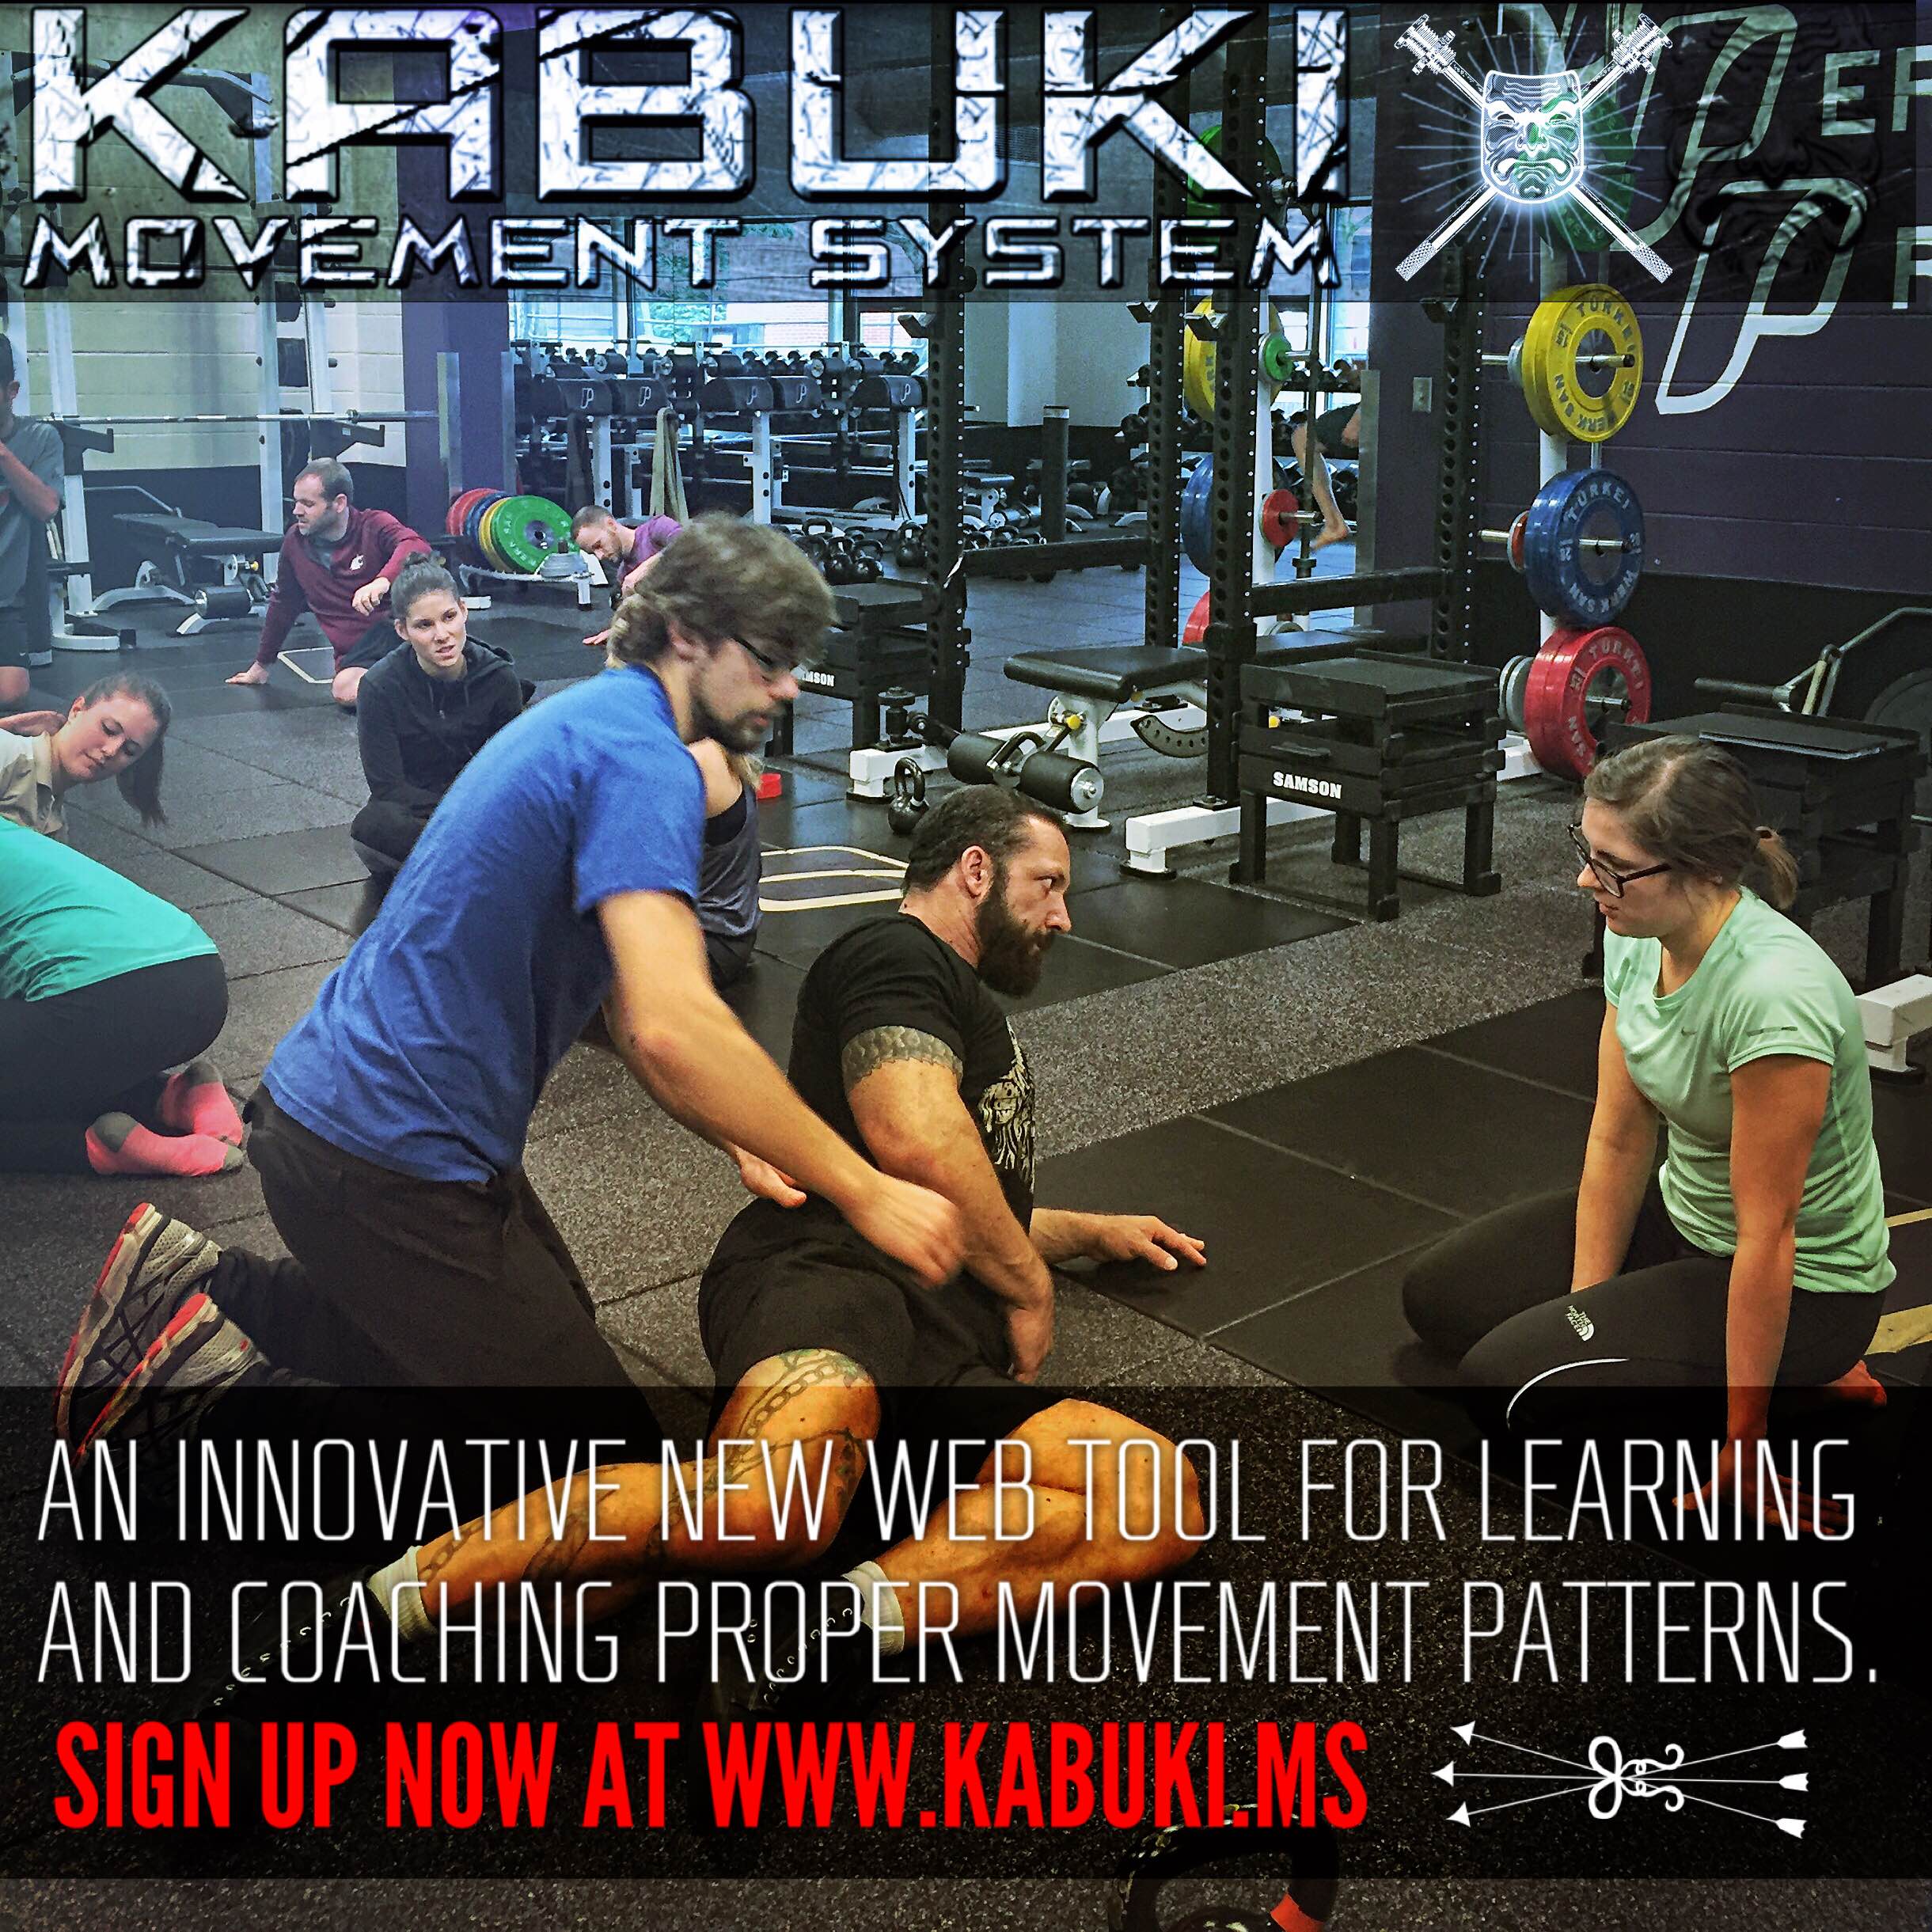 Kabuki Movement System. An innovative web tool for learning and coaching proper movement patterns